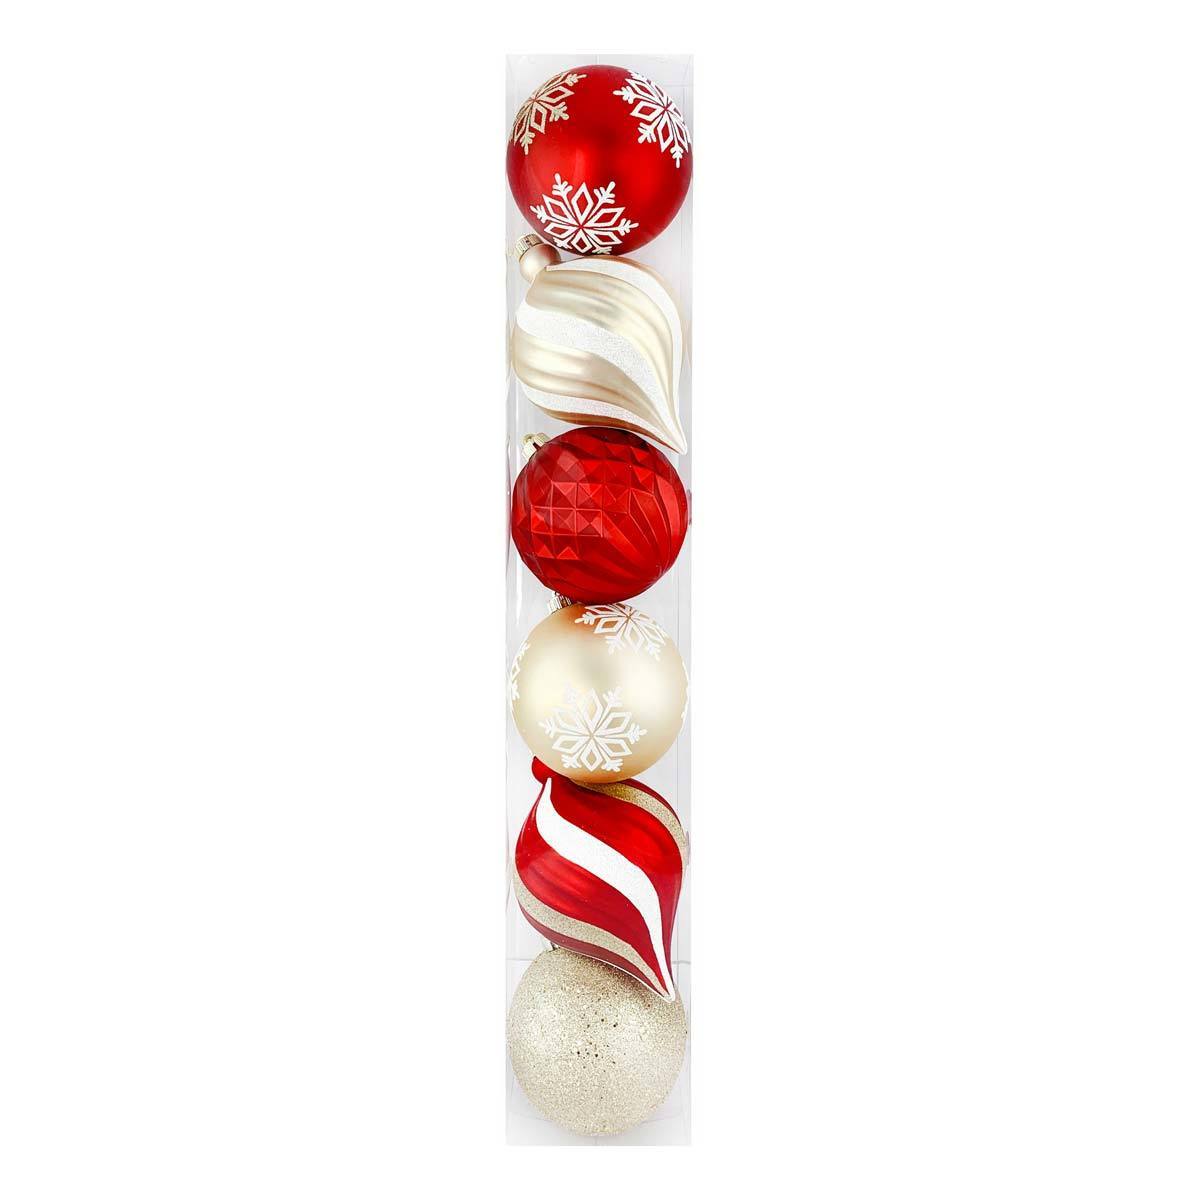 6 Inch (15cm) Shatter-Resistant Christmas Ornaments Set of 6 in Red And Gold